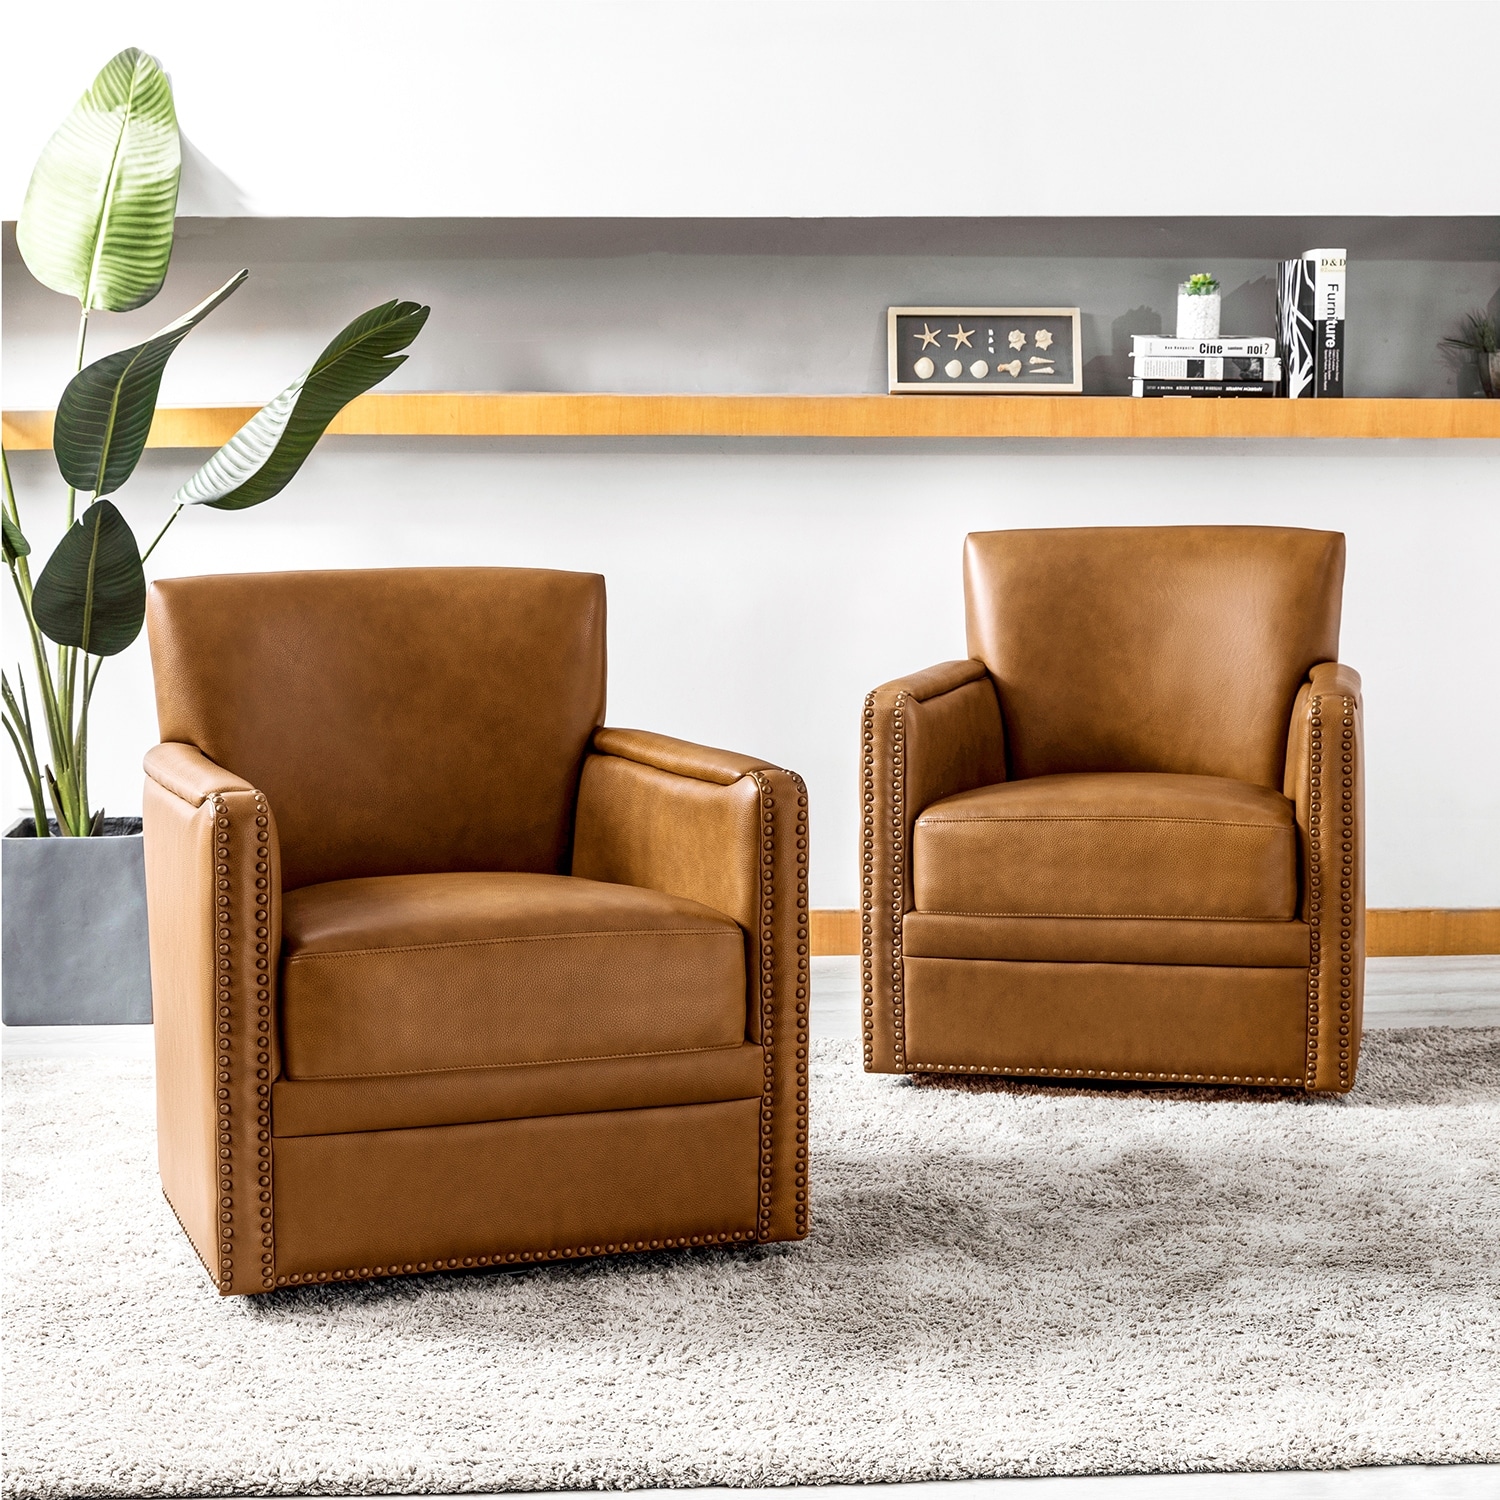 Pascual Classic Genuine Leather Swivel Chair With Nailhead Trim Arm Set of 2 by HULALA HOME